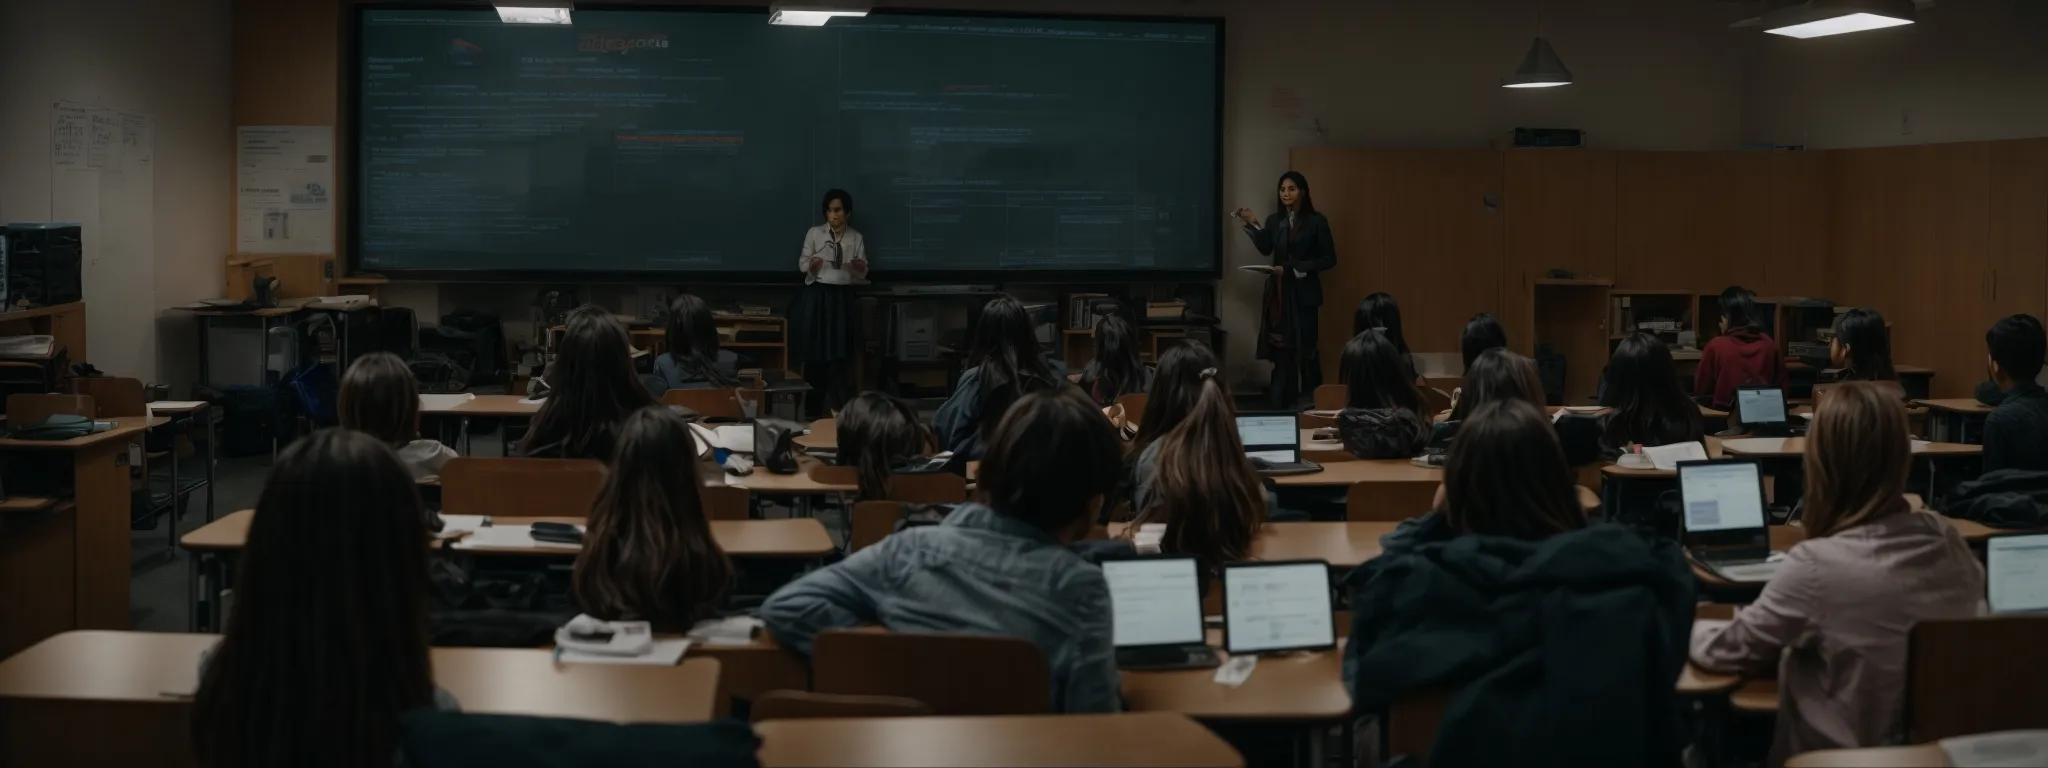 a classroom with students focused on a large screen displaying a web search interface.